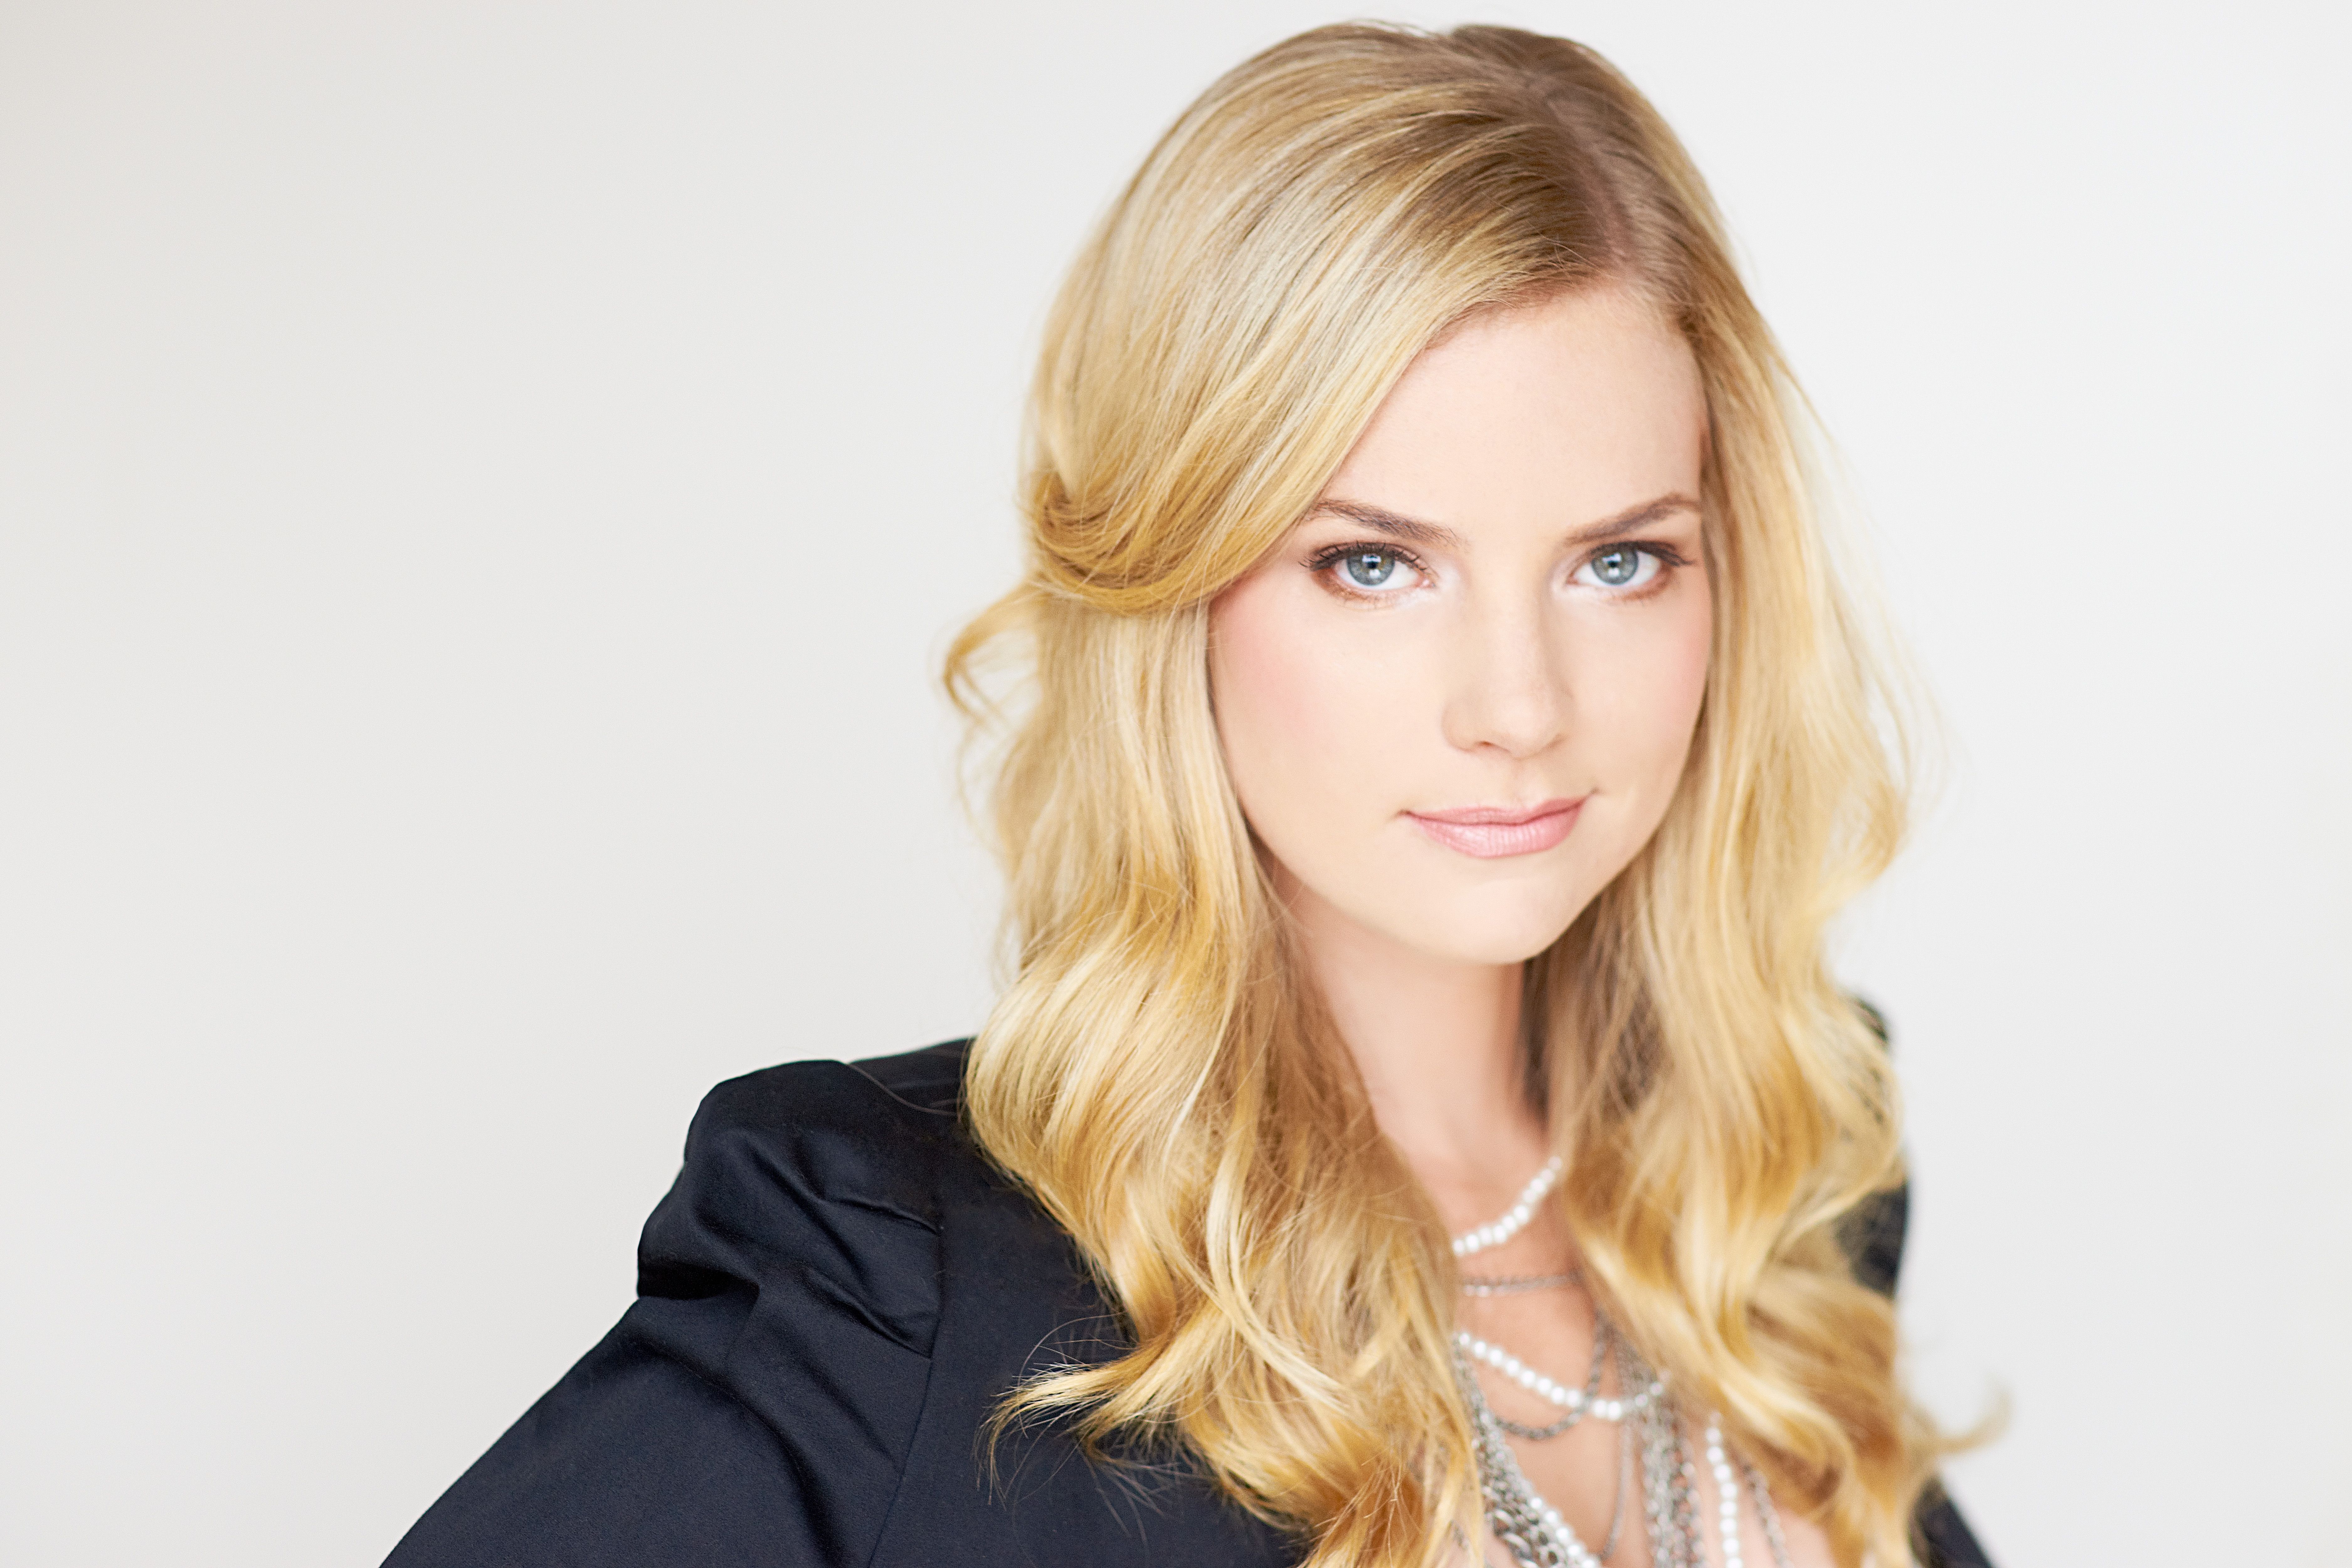 Actress Cindy Busby discusses The Big Year